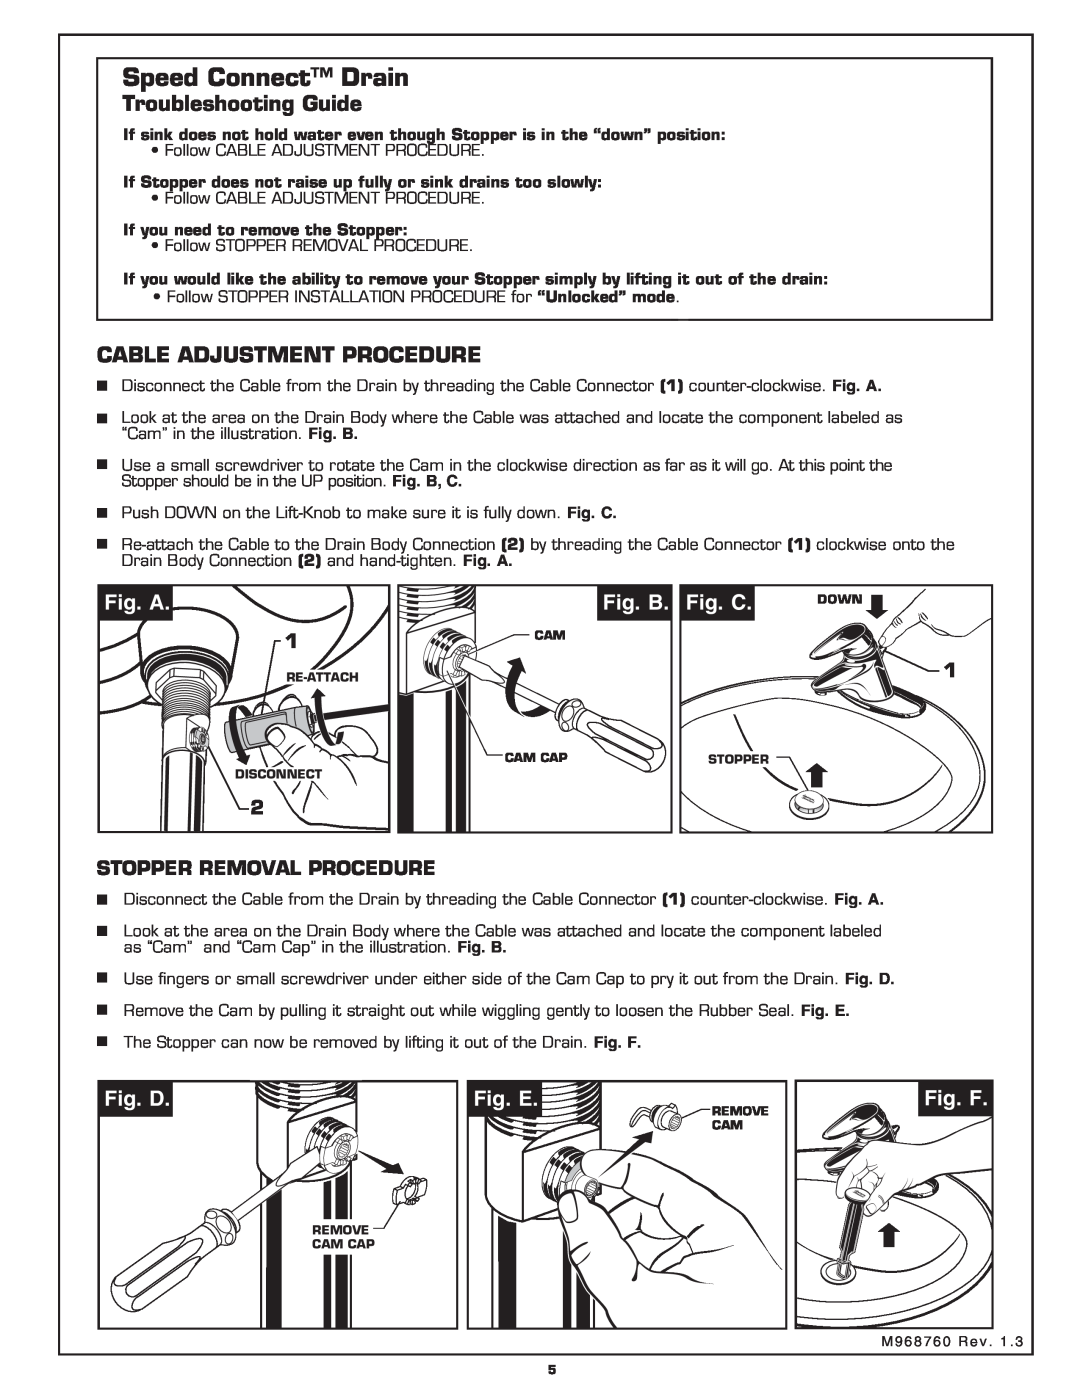 American Standard 2000.16X Troubleshooting Guide, Cable Adjustment Procedure, Fig. A, Fig. B, Fig. C, Fig. D, Fig. E 